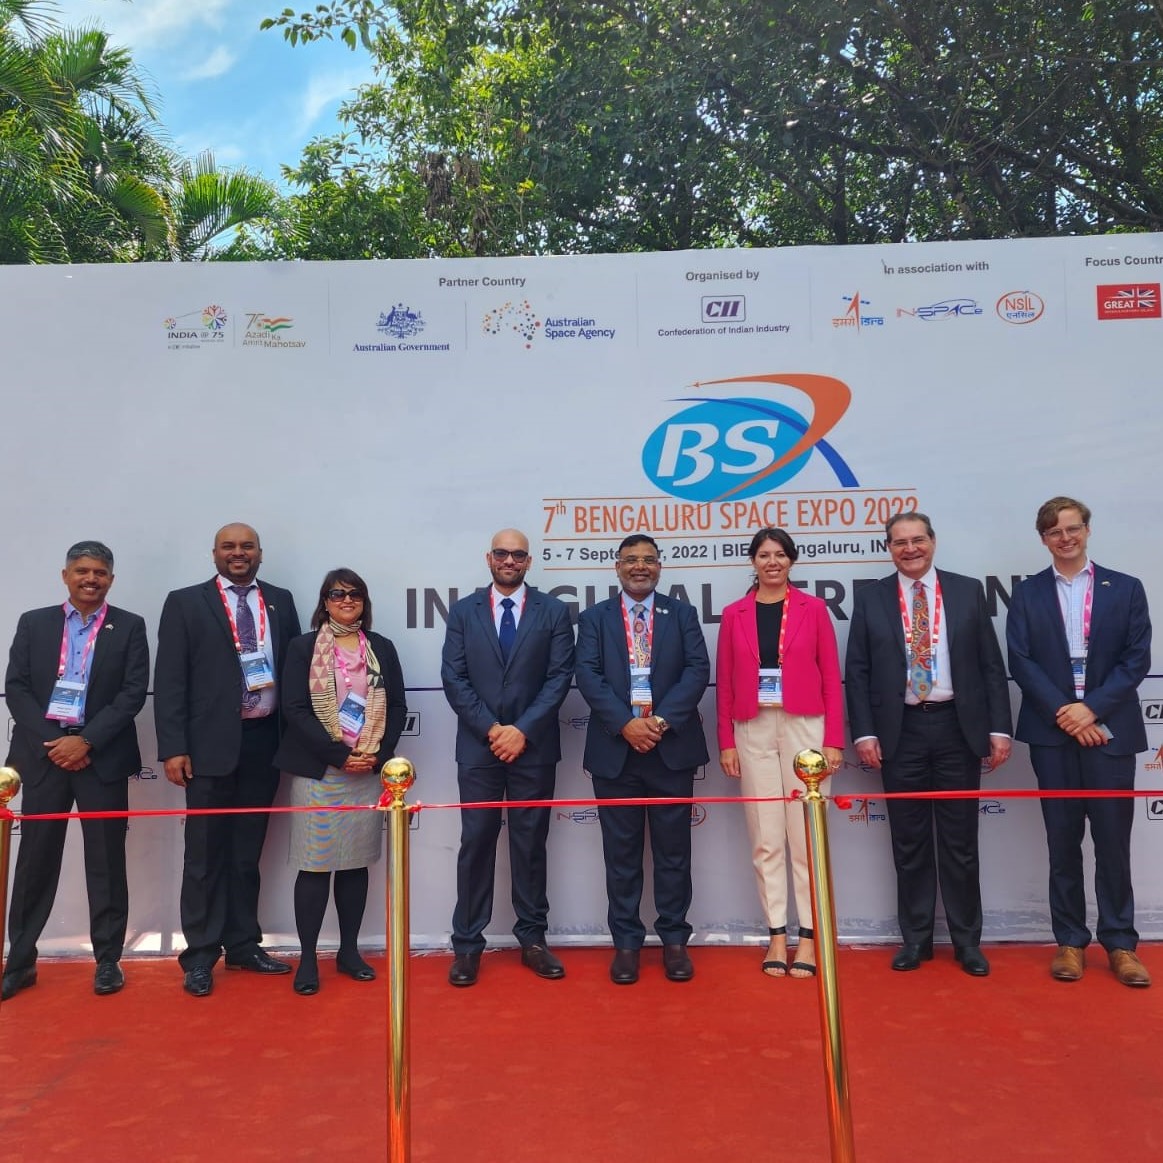 UniSA space startups announce suite of international MOUs at Indian space expo